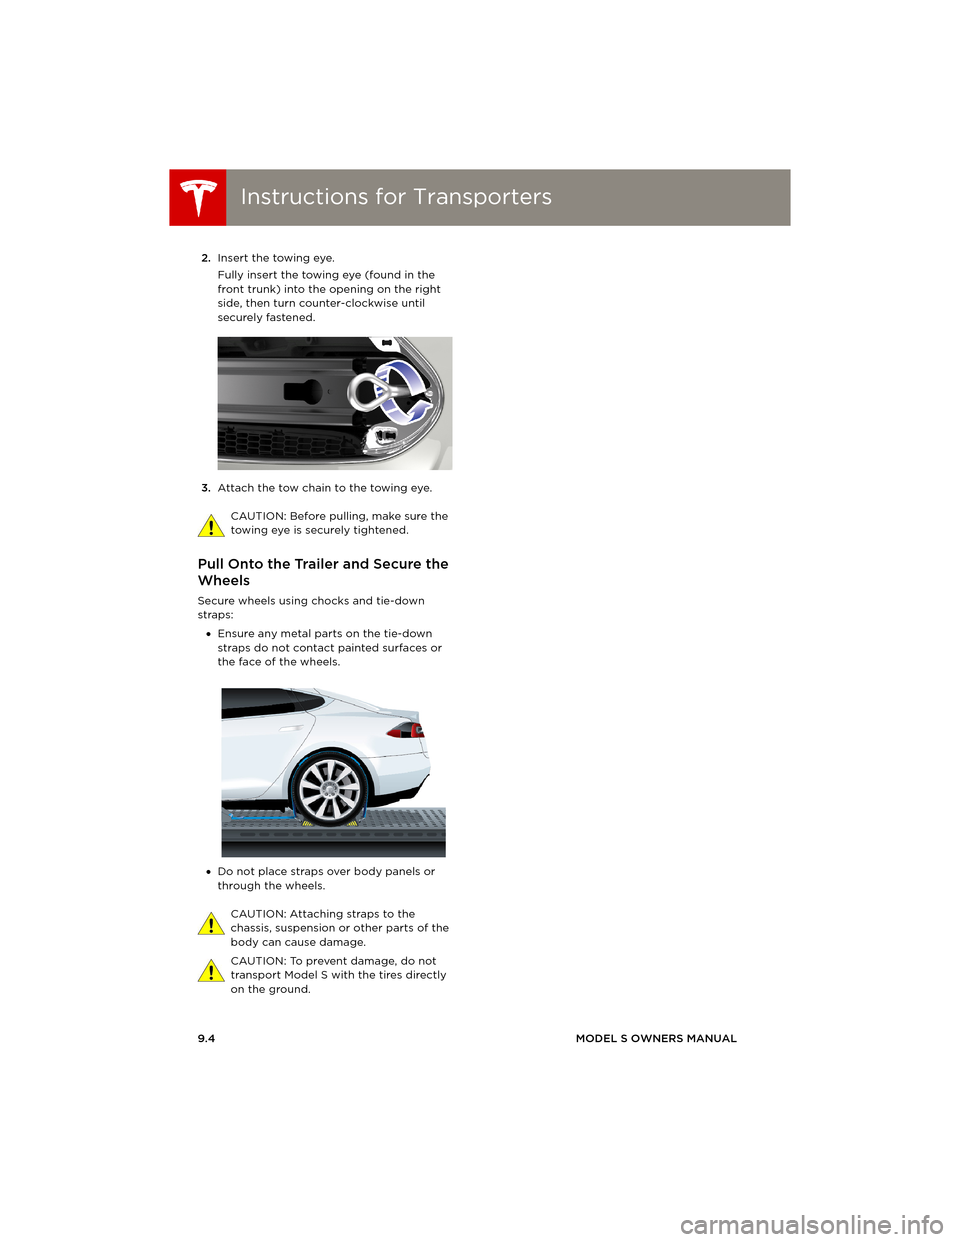 TESLA MODEL S 2014  Owners manual (Europe) Instructions for TransportersInstructions for Transporters
9.4MODEL S OWNERS MANUAL 2.Insert the towing eye.
Fully insert the towing eye (found in the 
front trunk) into the opening on the right 
side